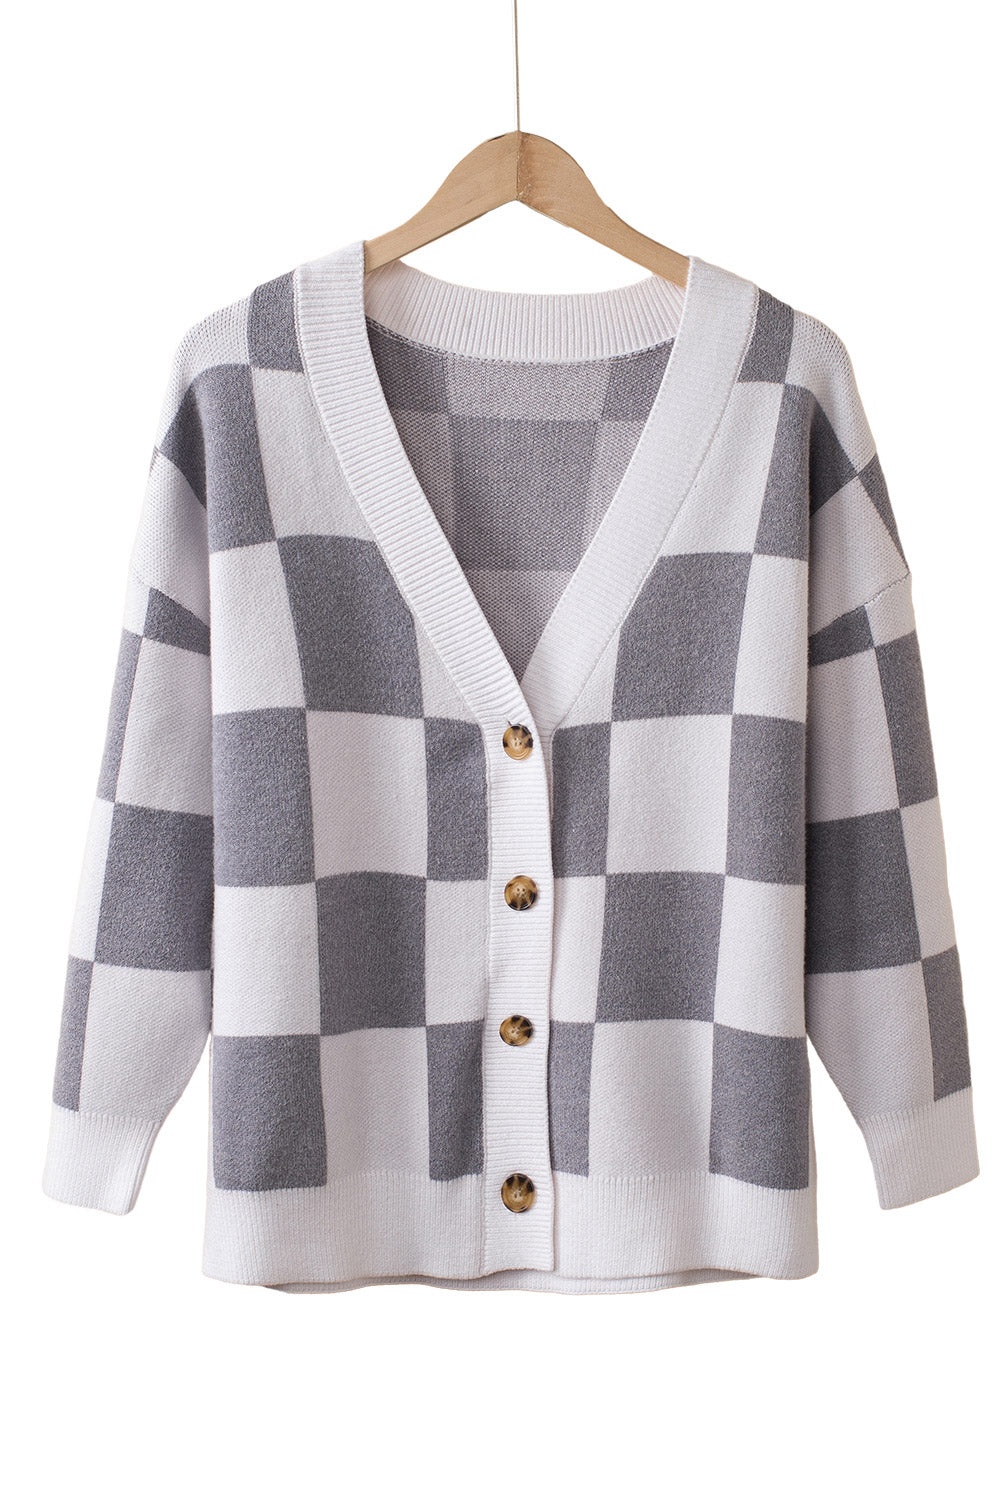 LC271943-11-S, LC271943-11-M, LC271943-11-L, LC271943-11-XL, LC271943-11-2XL, Gray Contrast Checkered Print Button Up Sweater Cardigan 